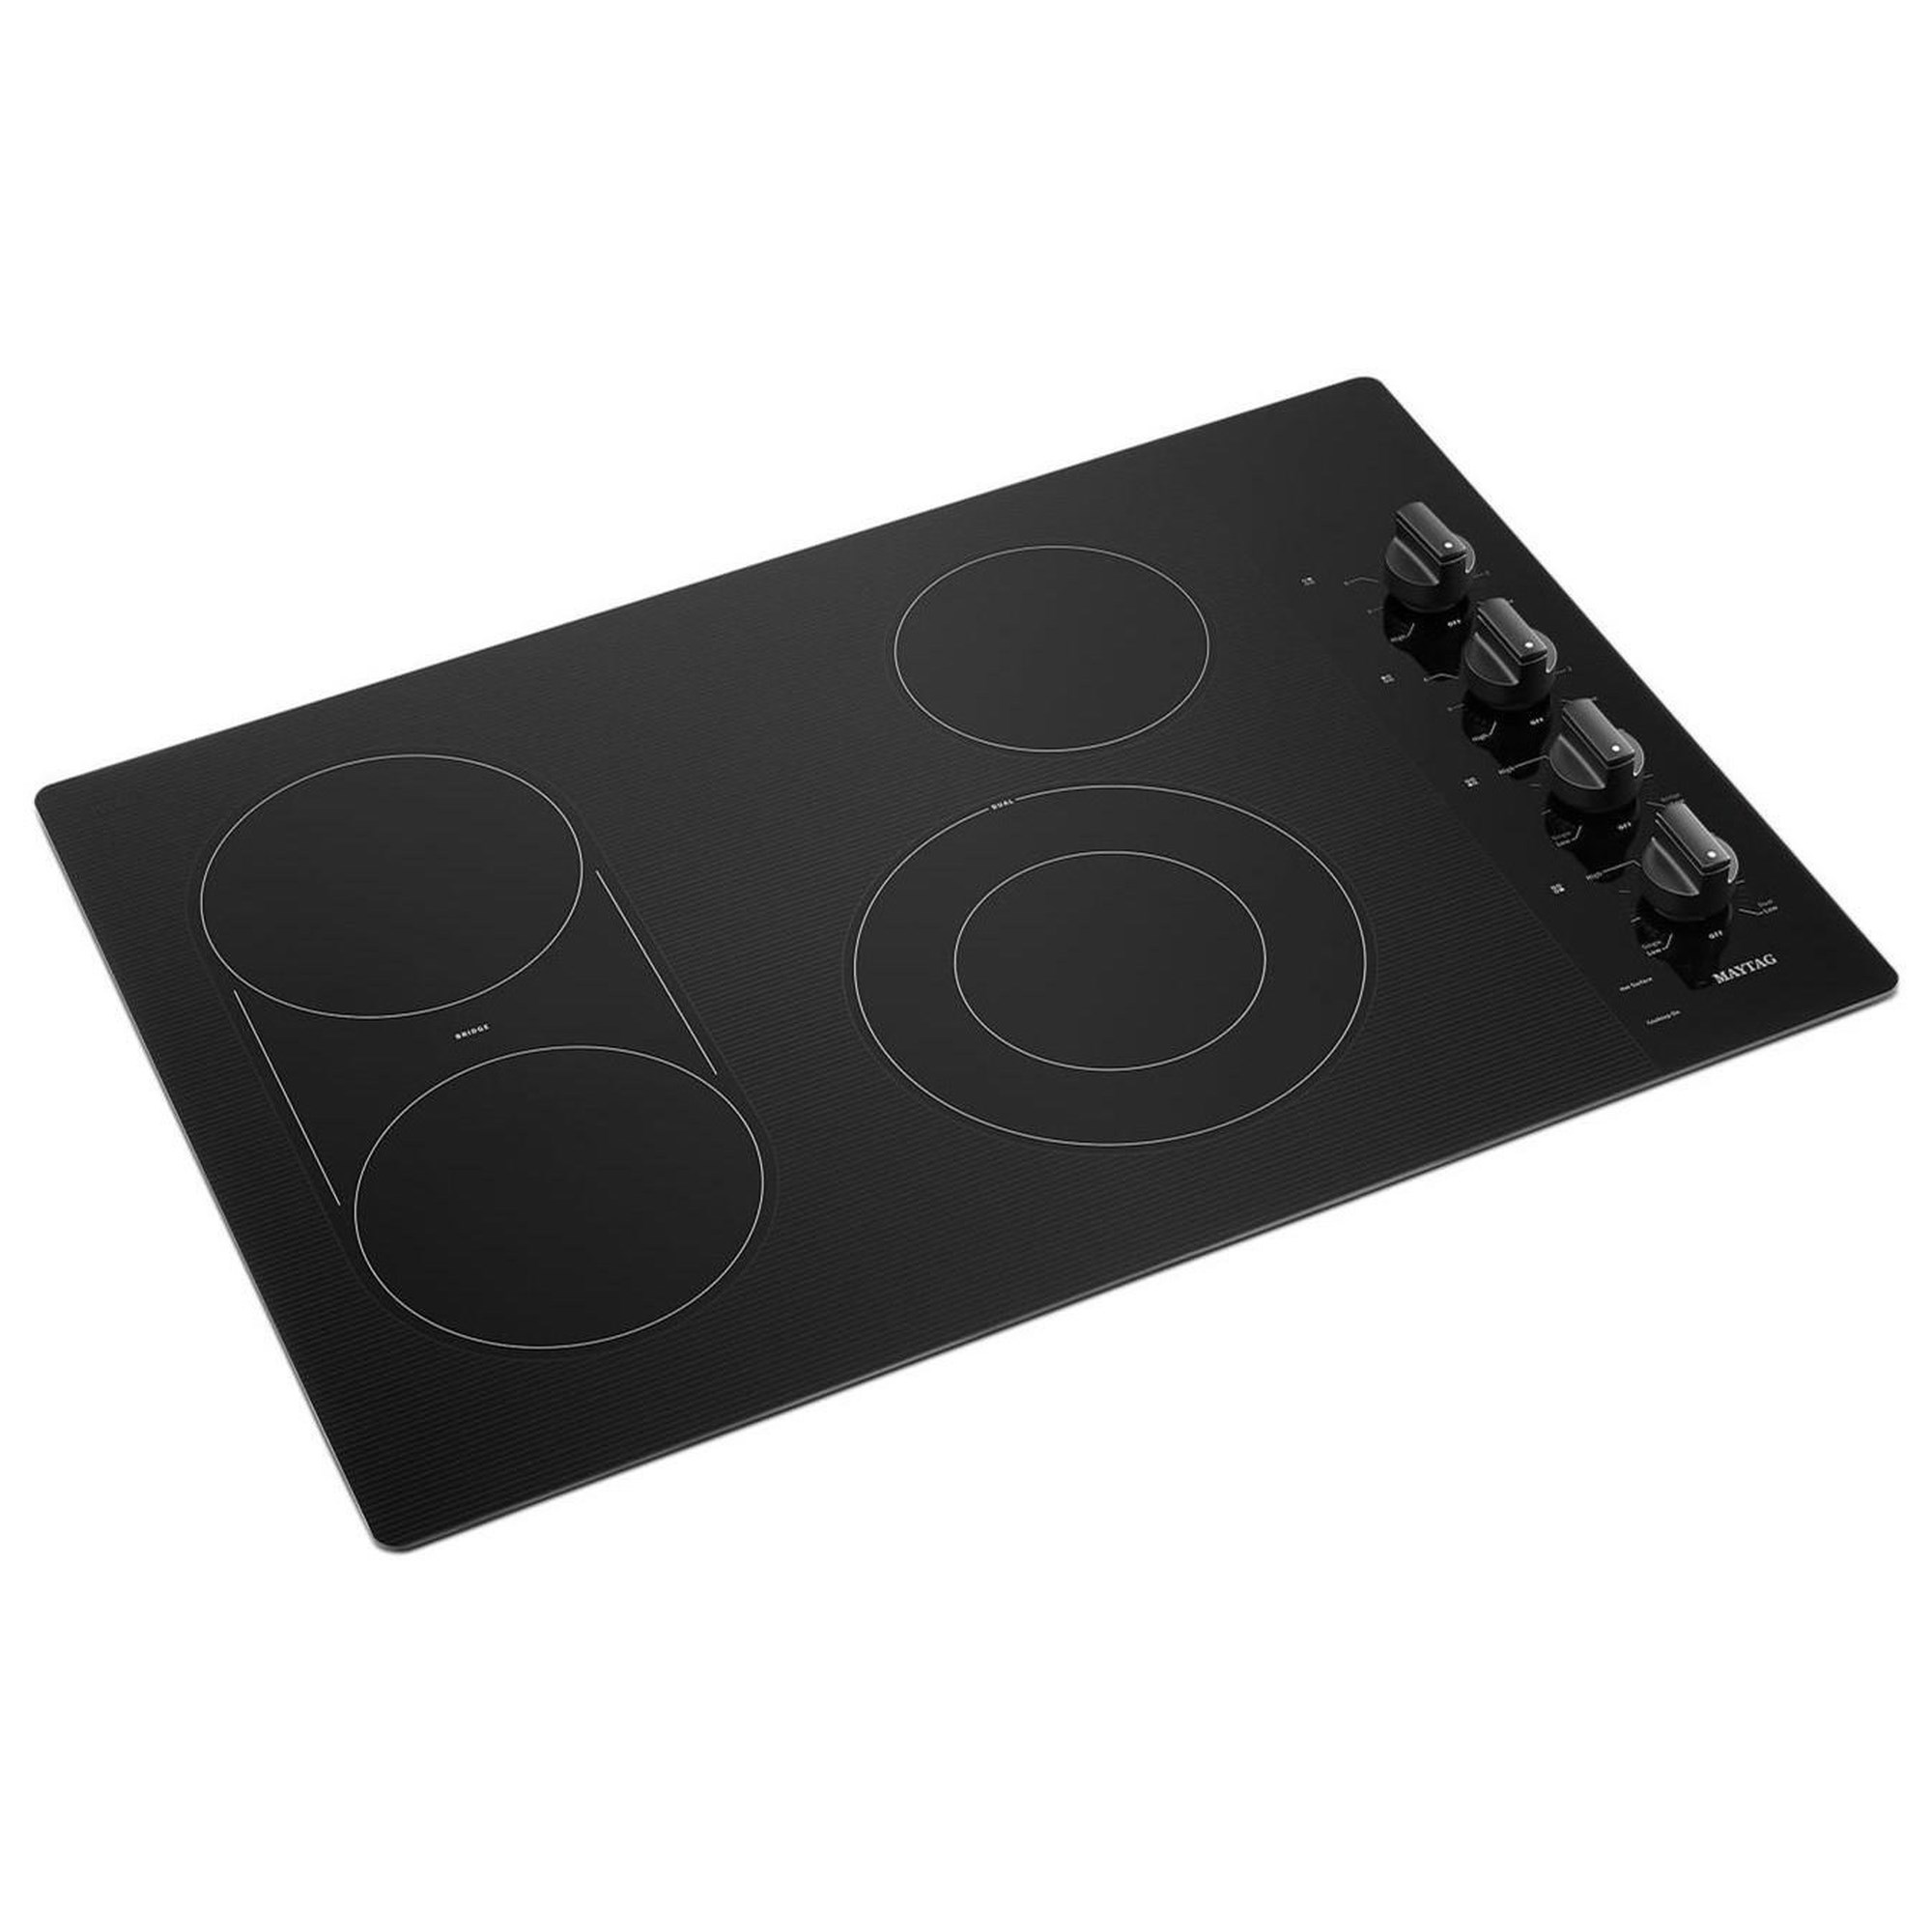 Maytag - MEC8836HS - 36-Inch Electric Cooktop with Reversible